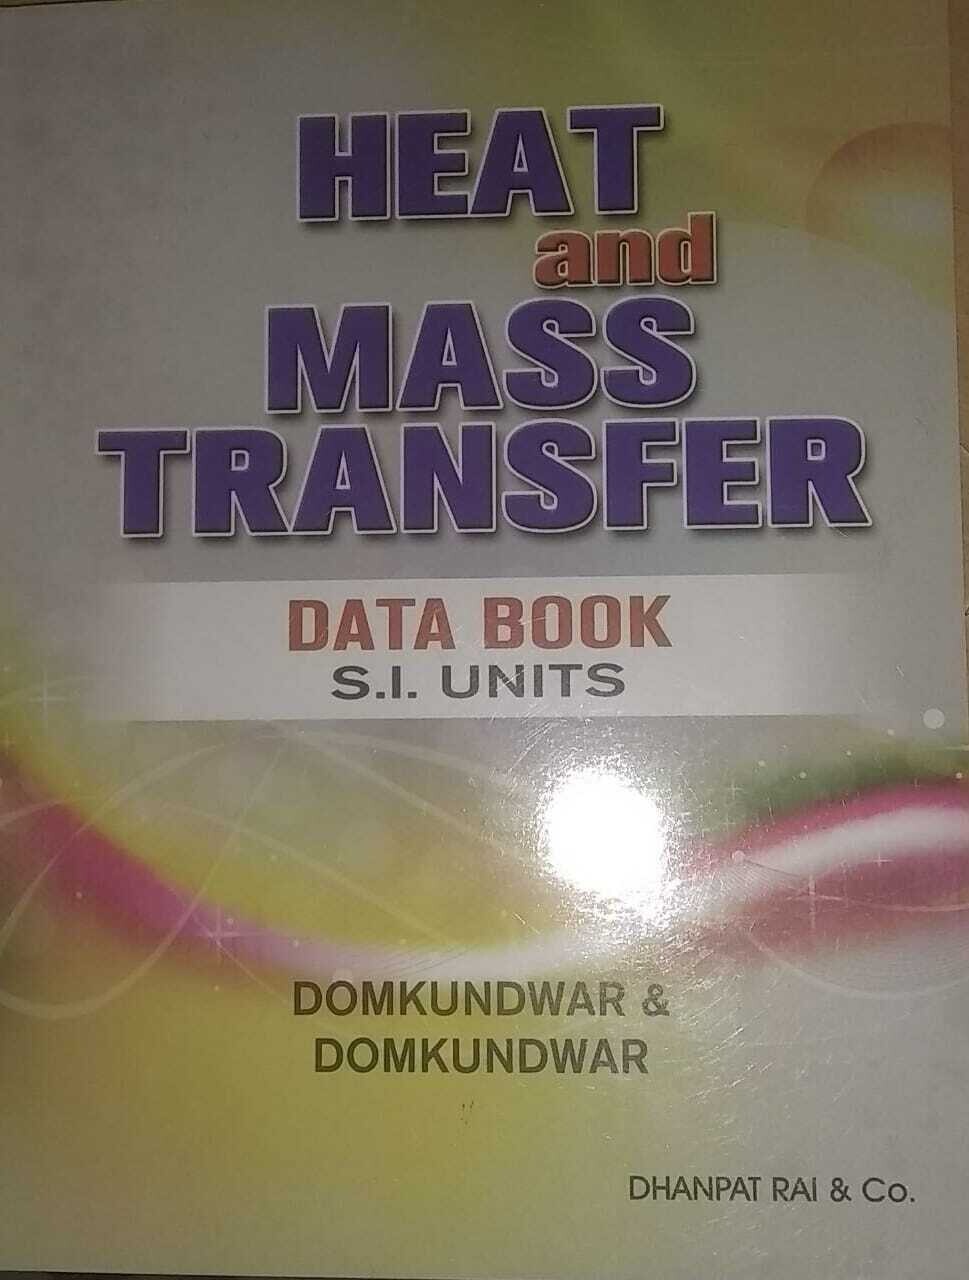 Heat and mass Transfer by Domkundwar & Domkundwar